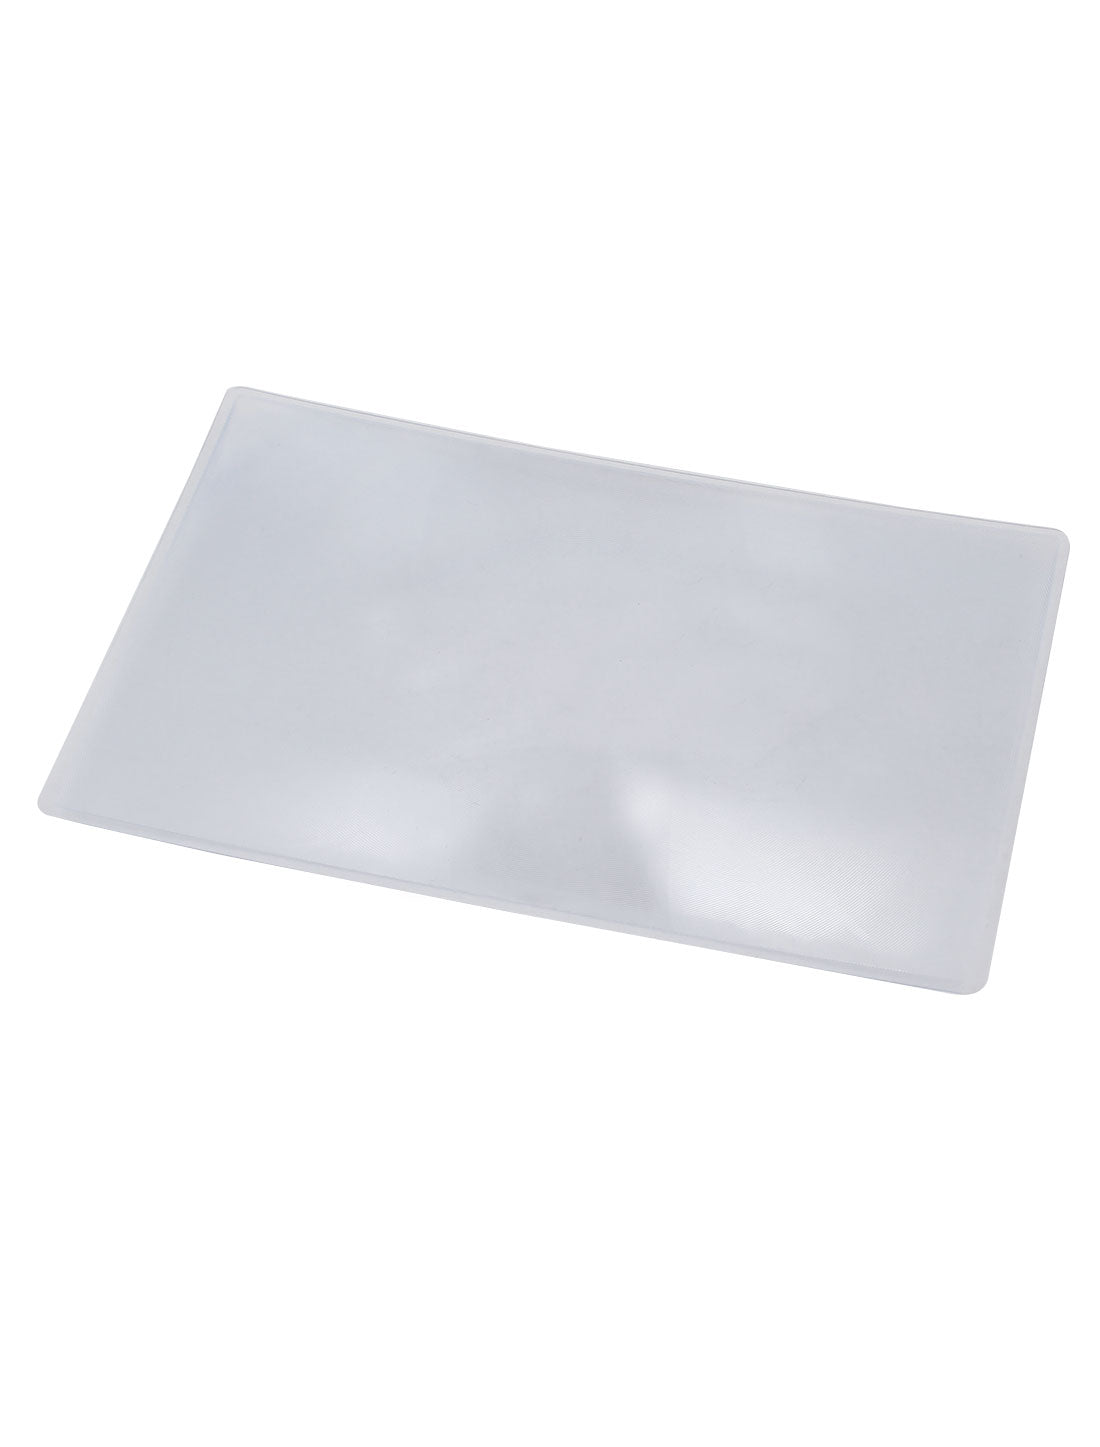 uxcell Uxcell Magnifier Lens Page 3x Magnifying Sheet 180mmx120mmx0.5mm